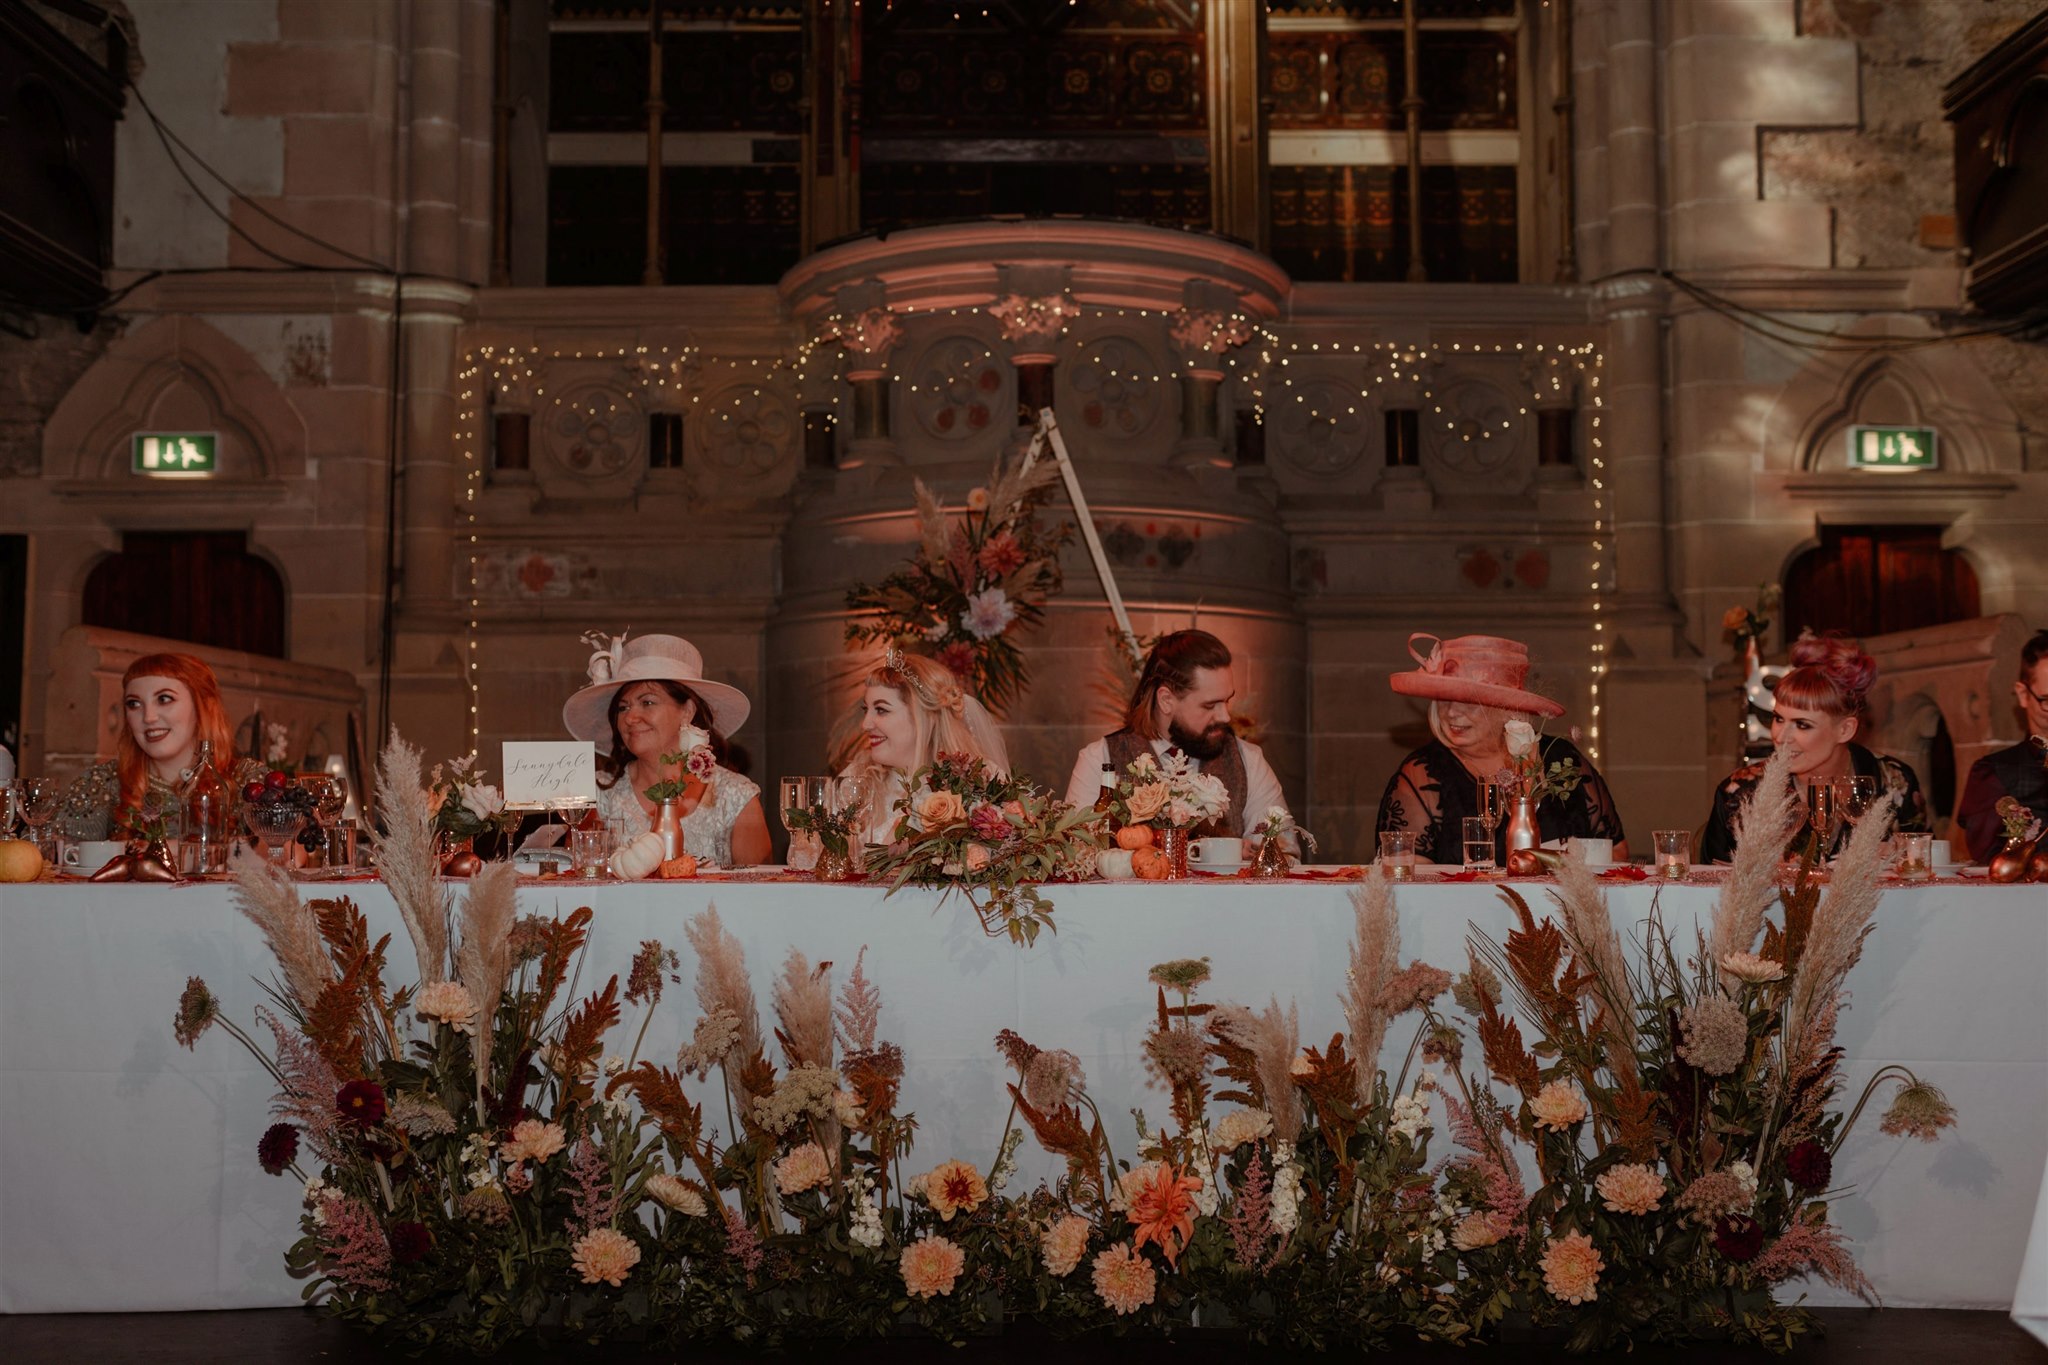 cottiers wedding photography glasgow witchy whimsical romantic and alternative autumn wedding